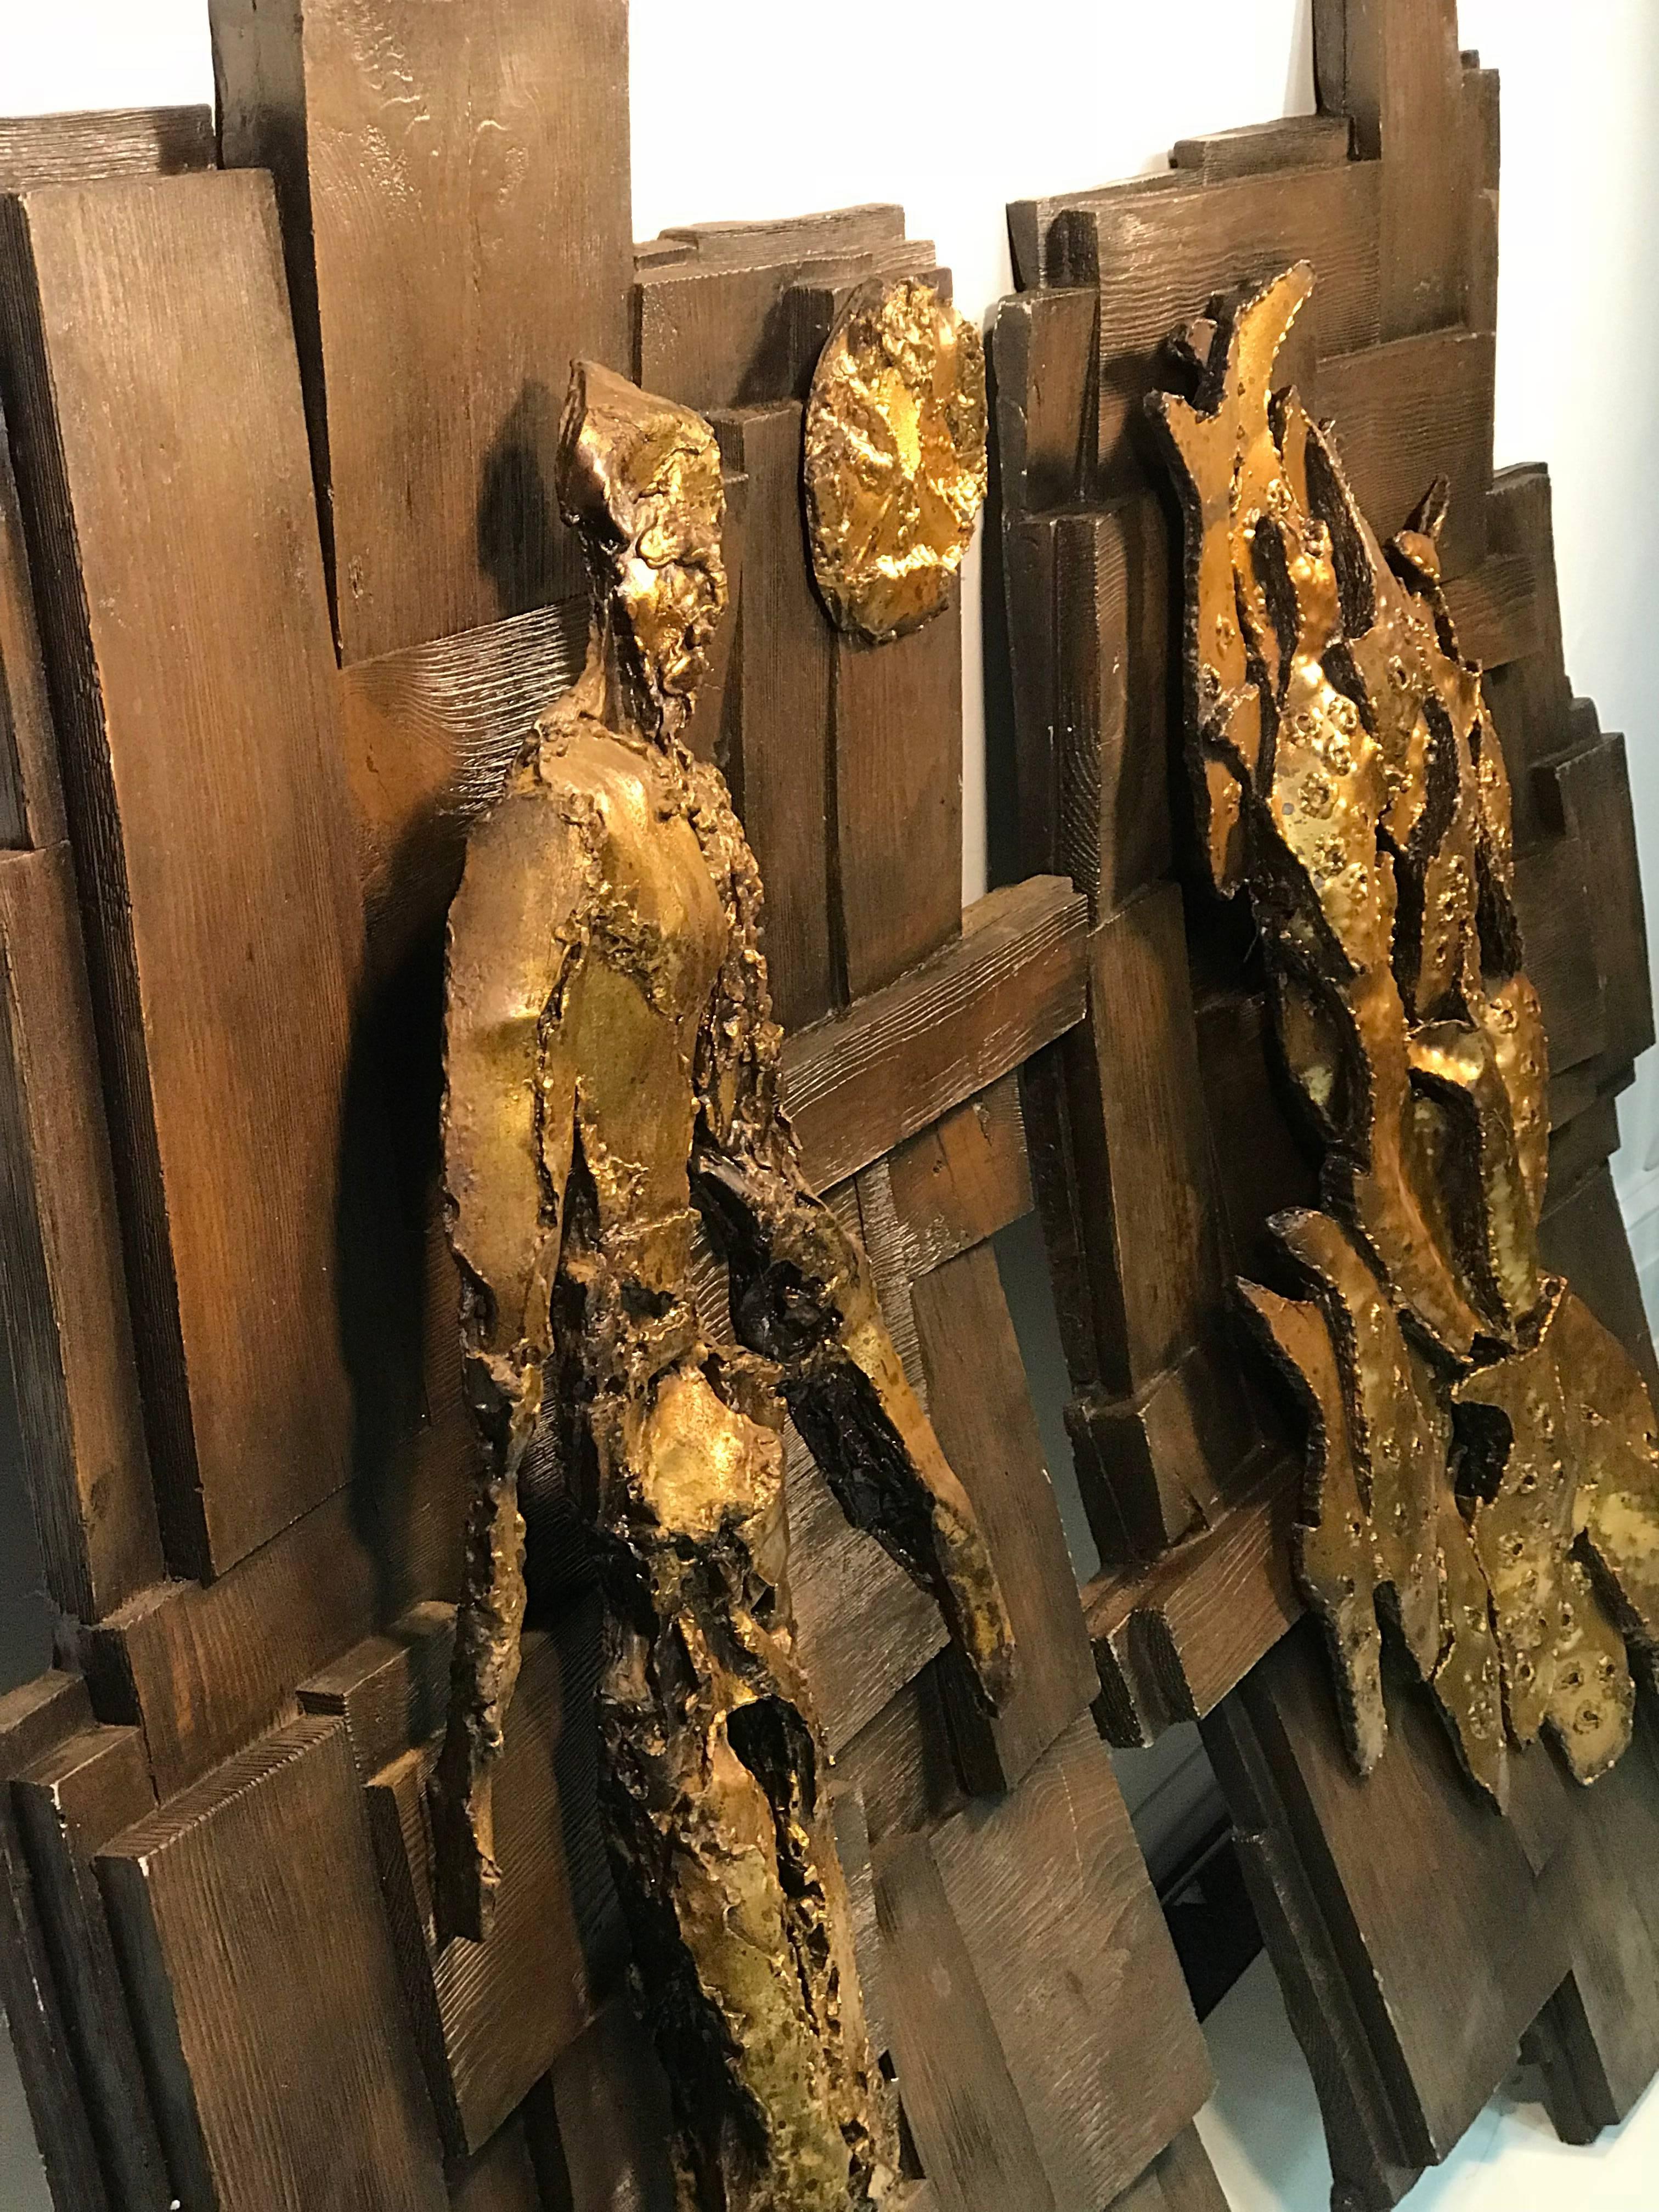 Pair of 1960s-1970s Brutalist resin wall sculptures with a deep bronze background and gilded brass toned figures. One wall sculpture features a abstract nude man with the sun in the sky. The other wall sculpture features a stylized cluster of fish.